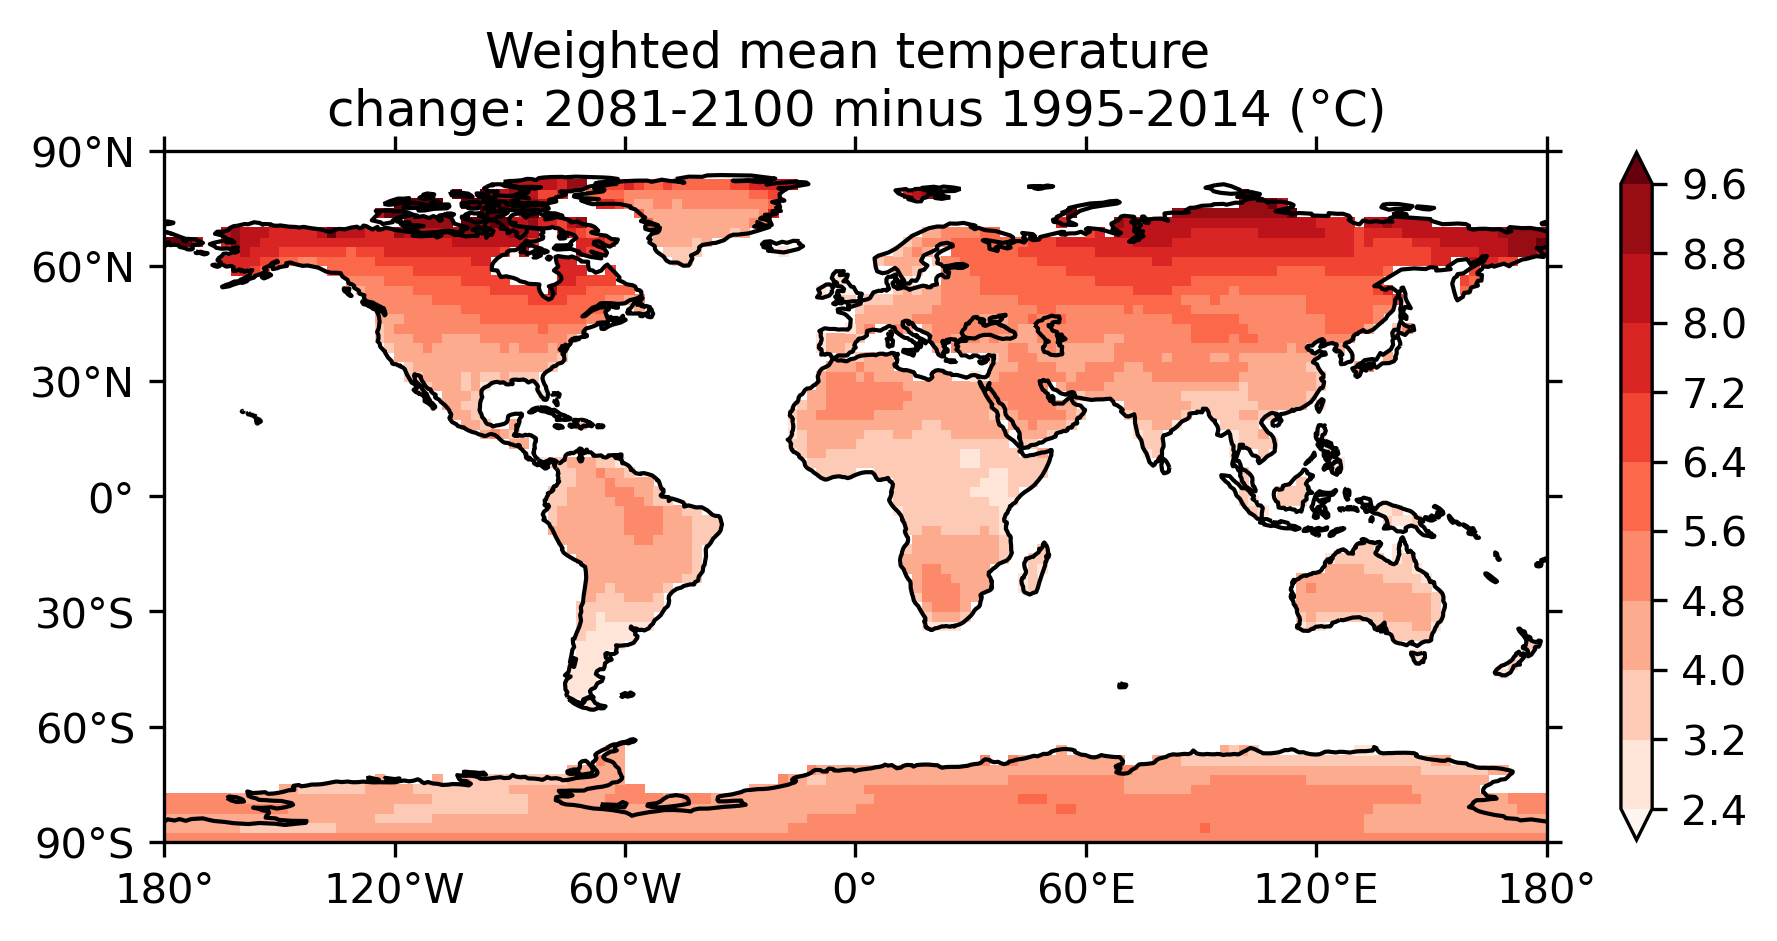 ../_images/temperature_change_weighted_map.png